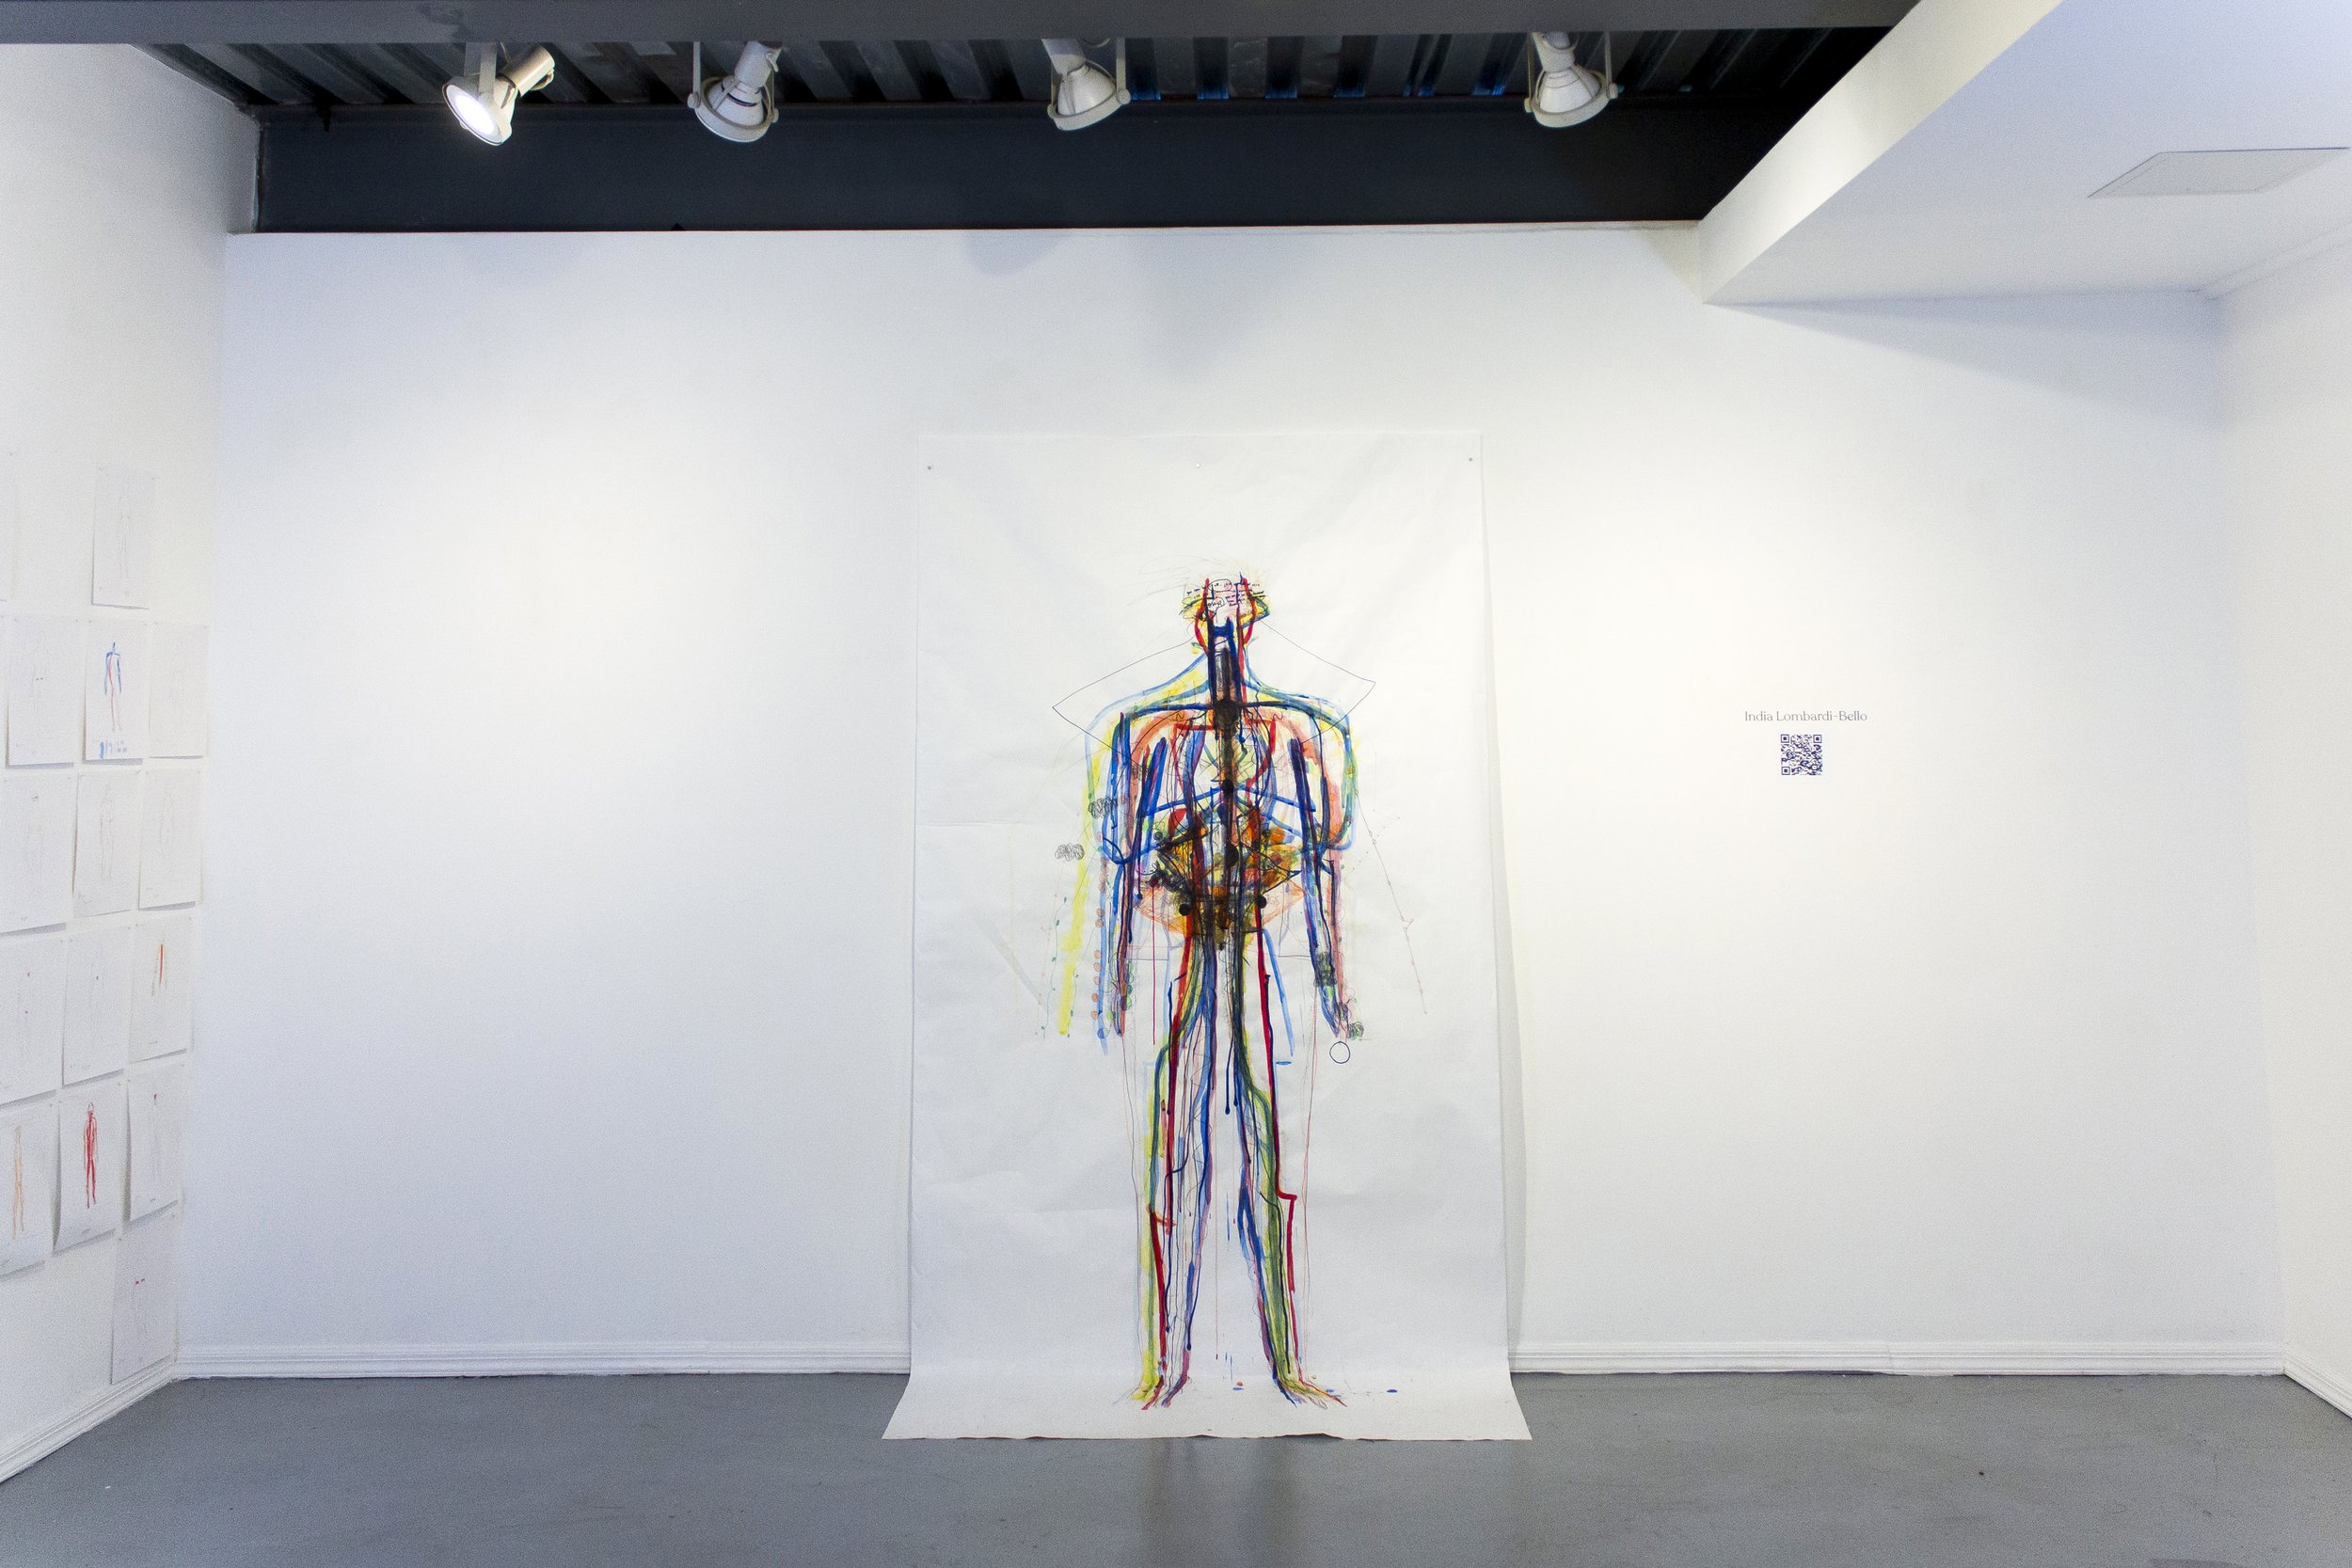  life scale multi-color linear drawing of human figure 